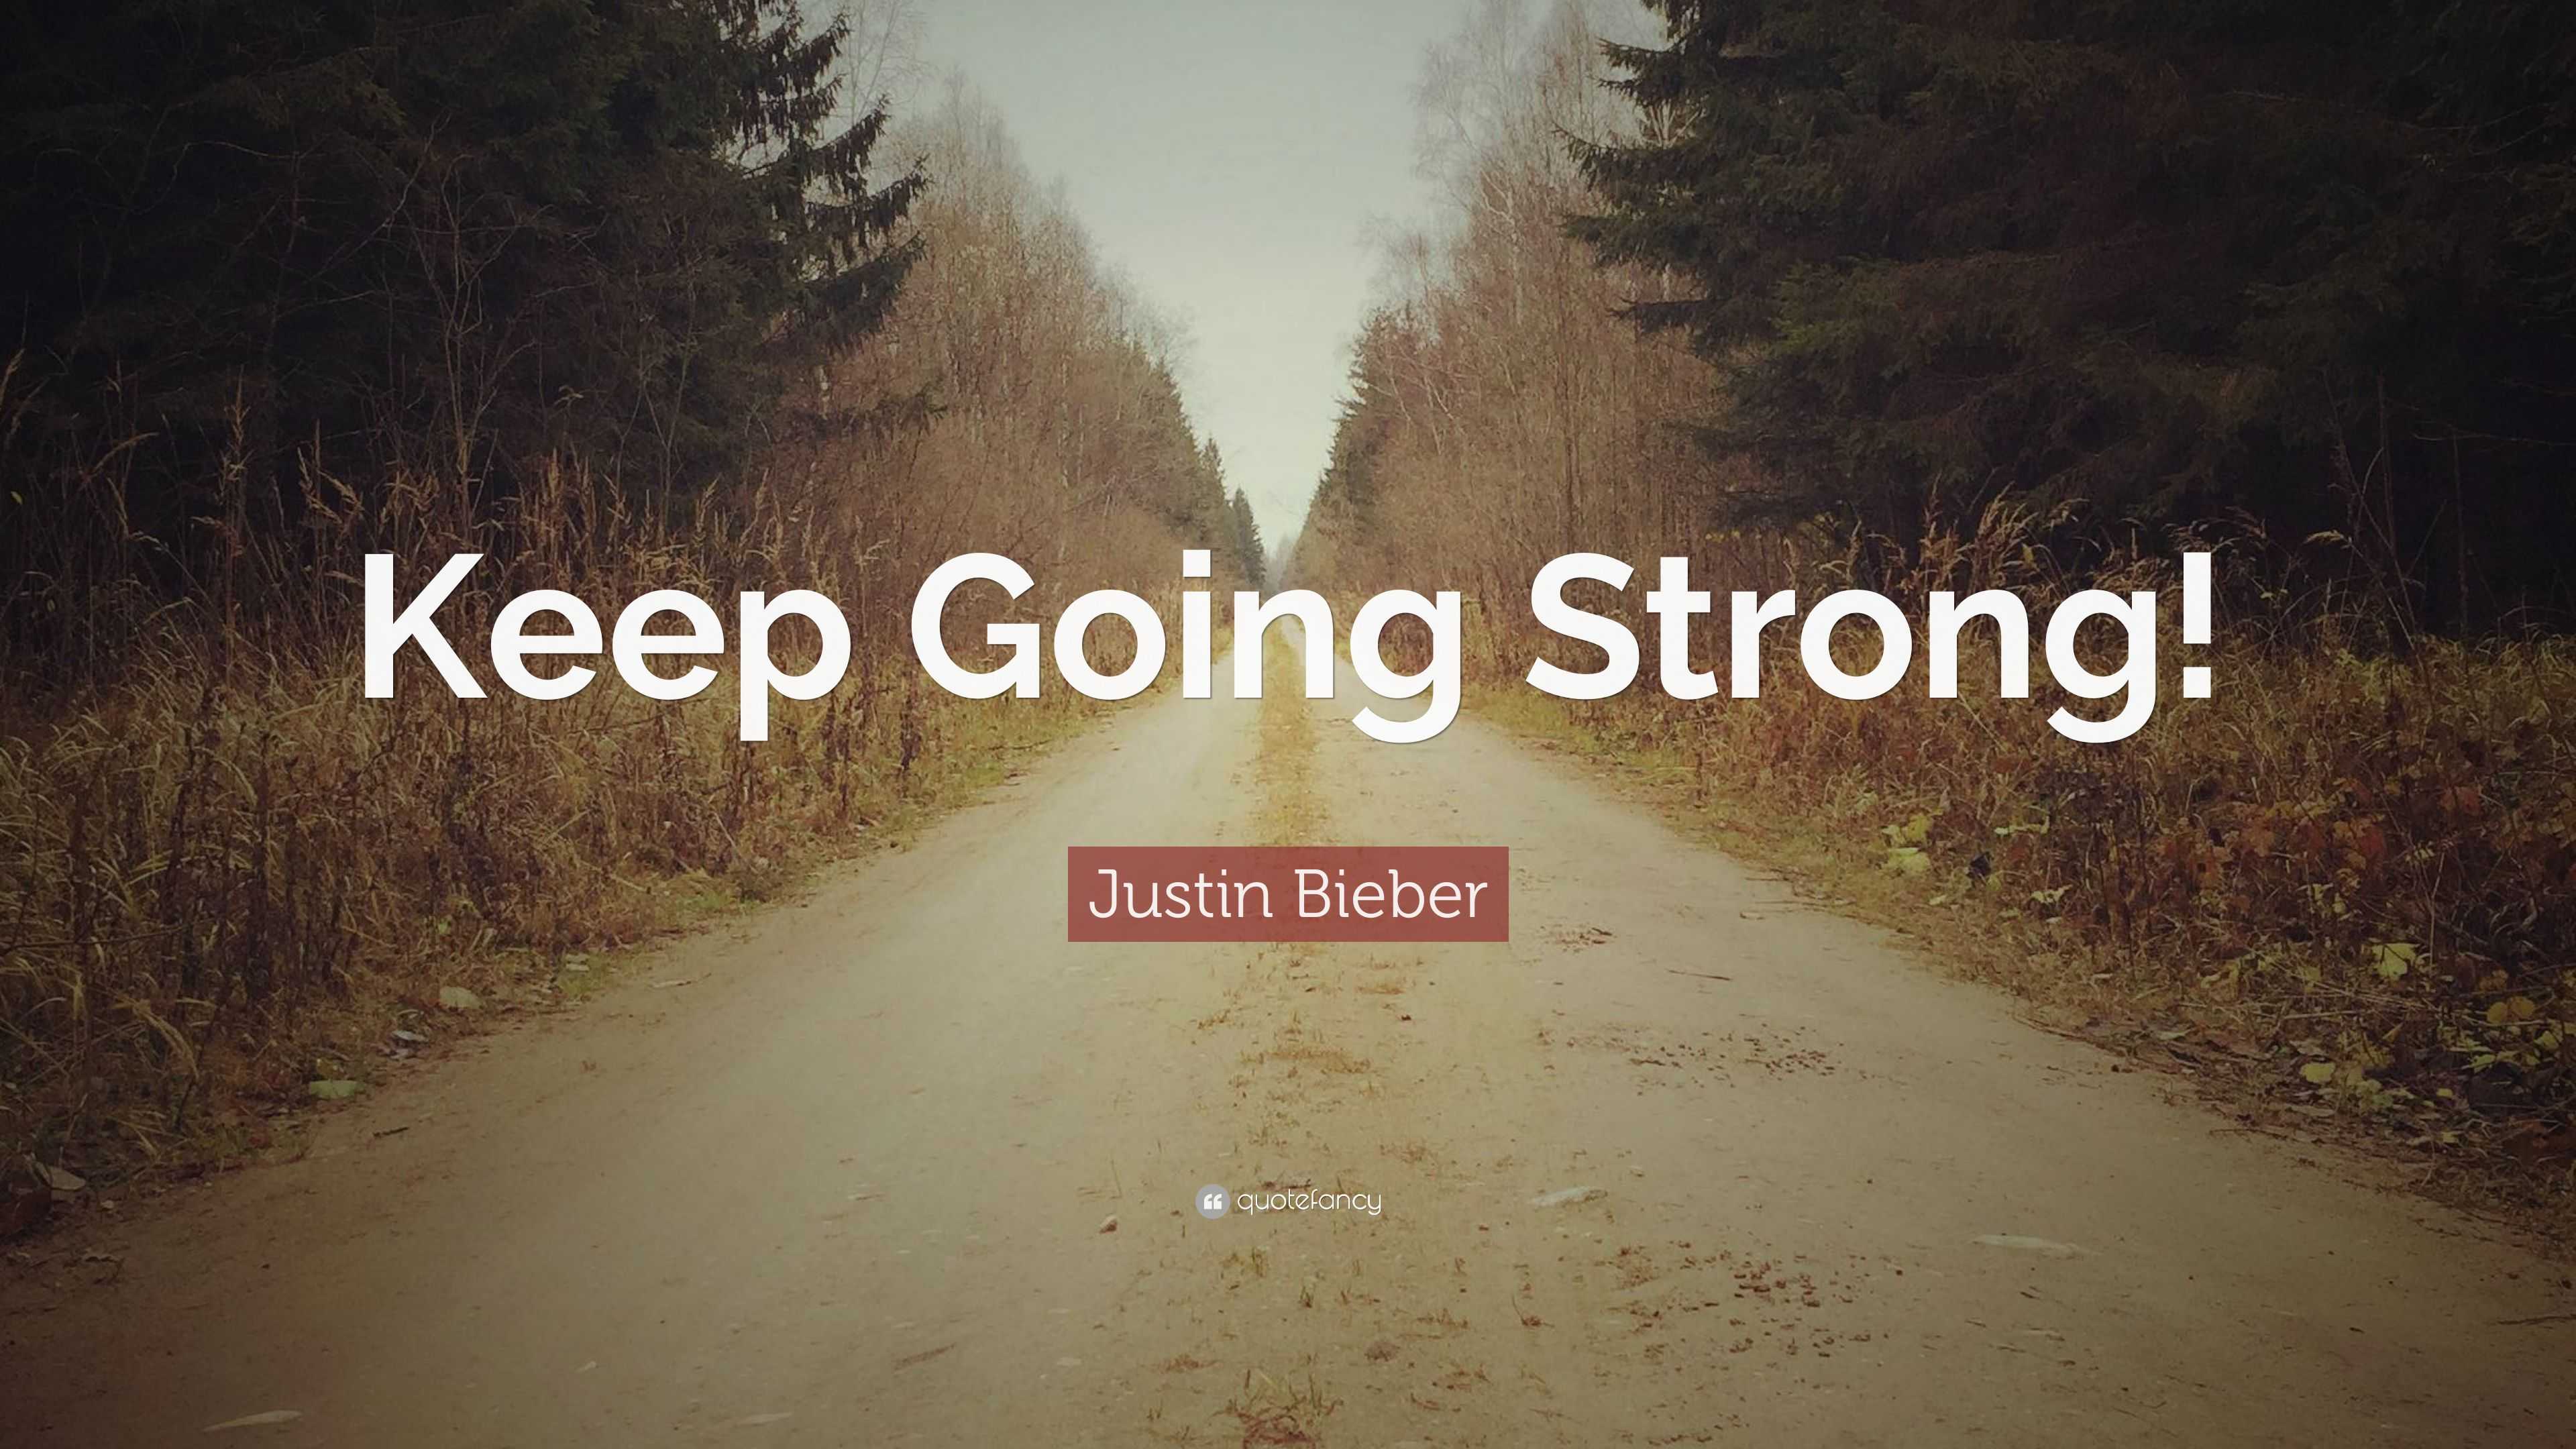 Justin Bieber Quote “Keep Going Strong!”